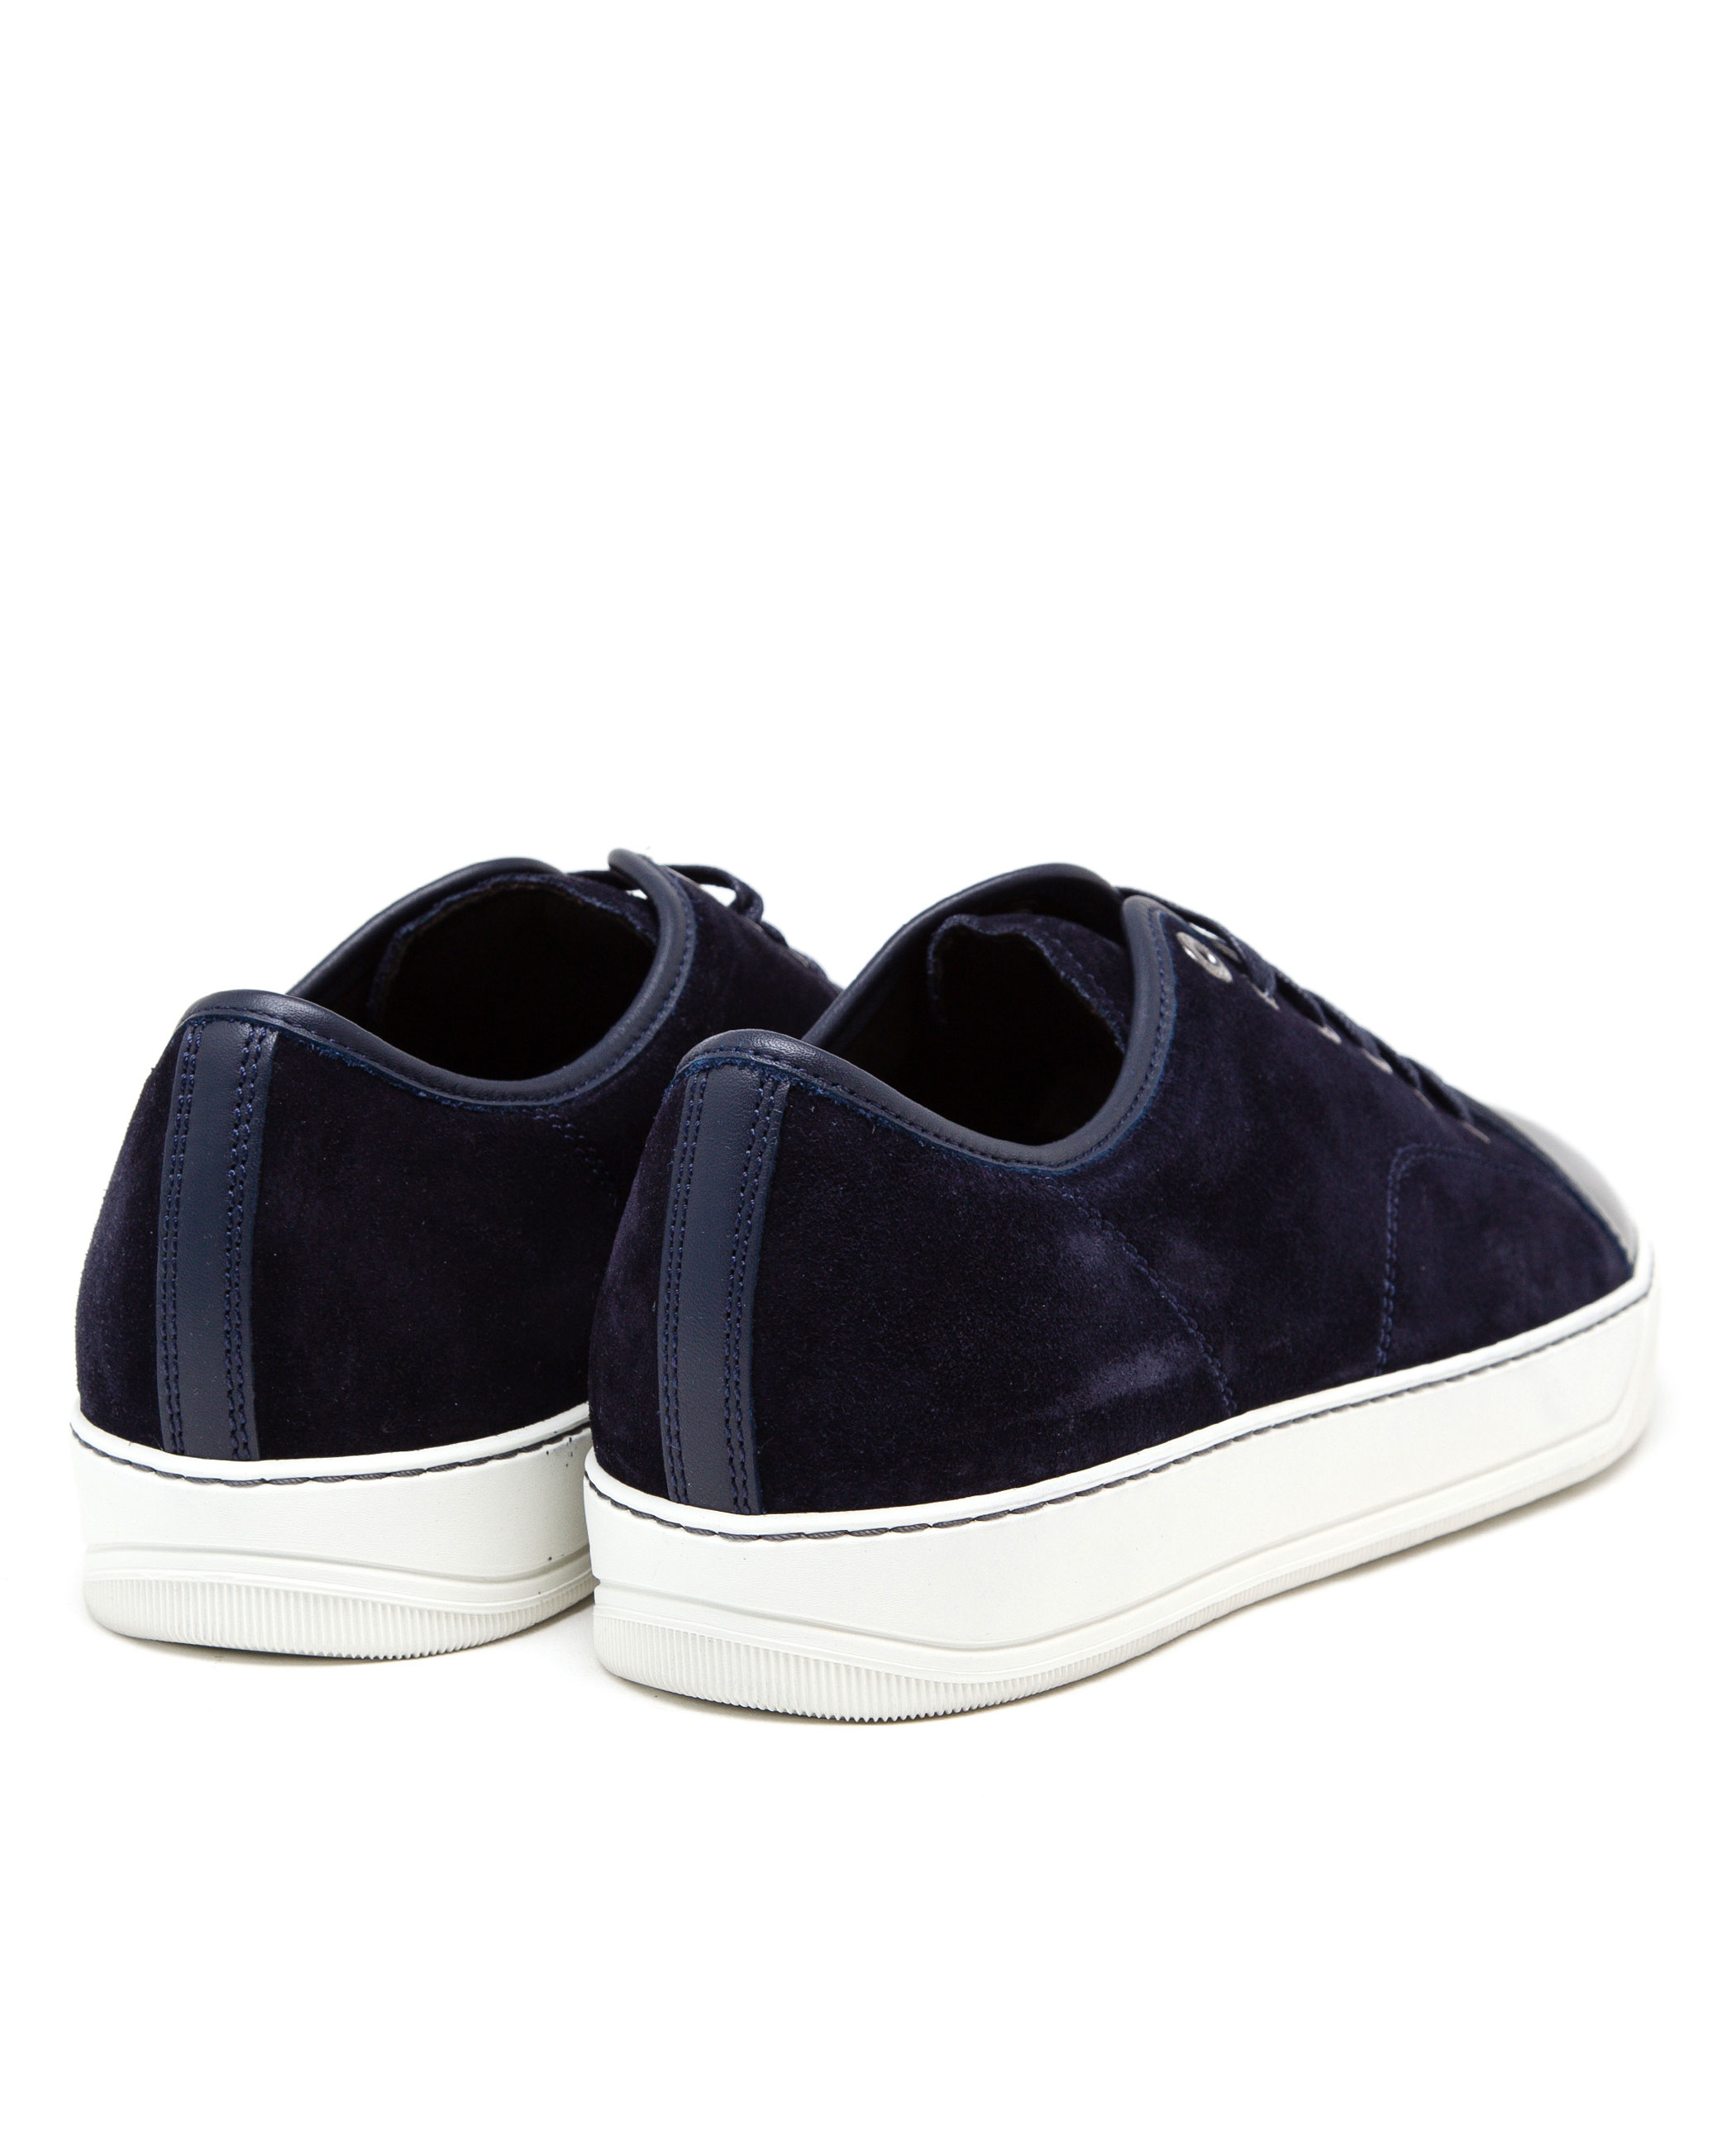 Lanvin Suede And Patent Leather Sneakers in Navy (Blue) for Men - Lyst